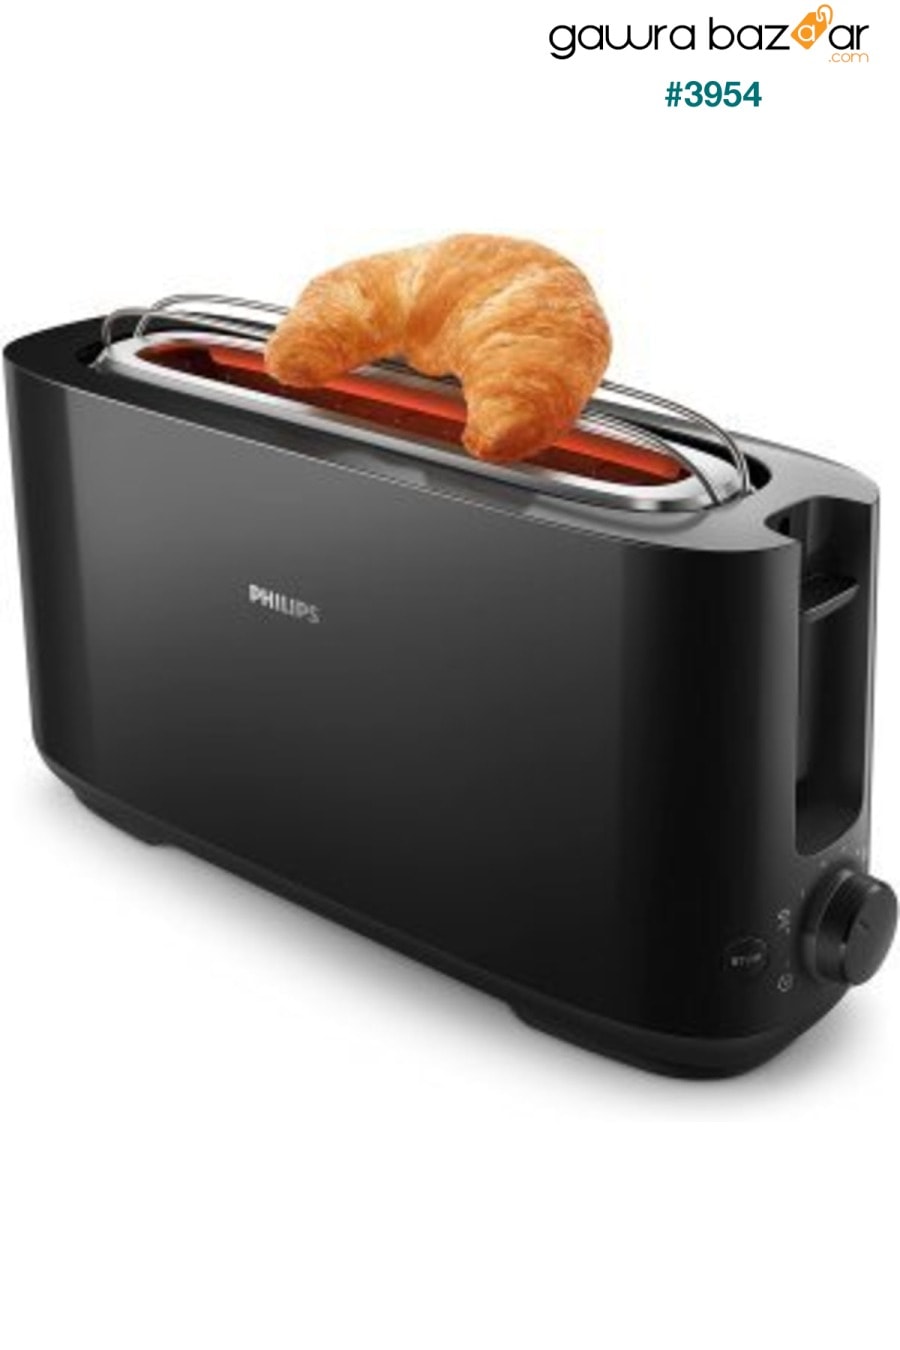 HD2590 / 90 Daily Collection Toaster 2016St023123228387 Philips 0